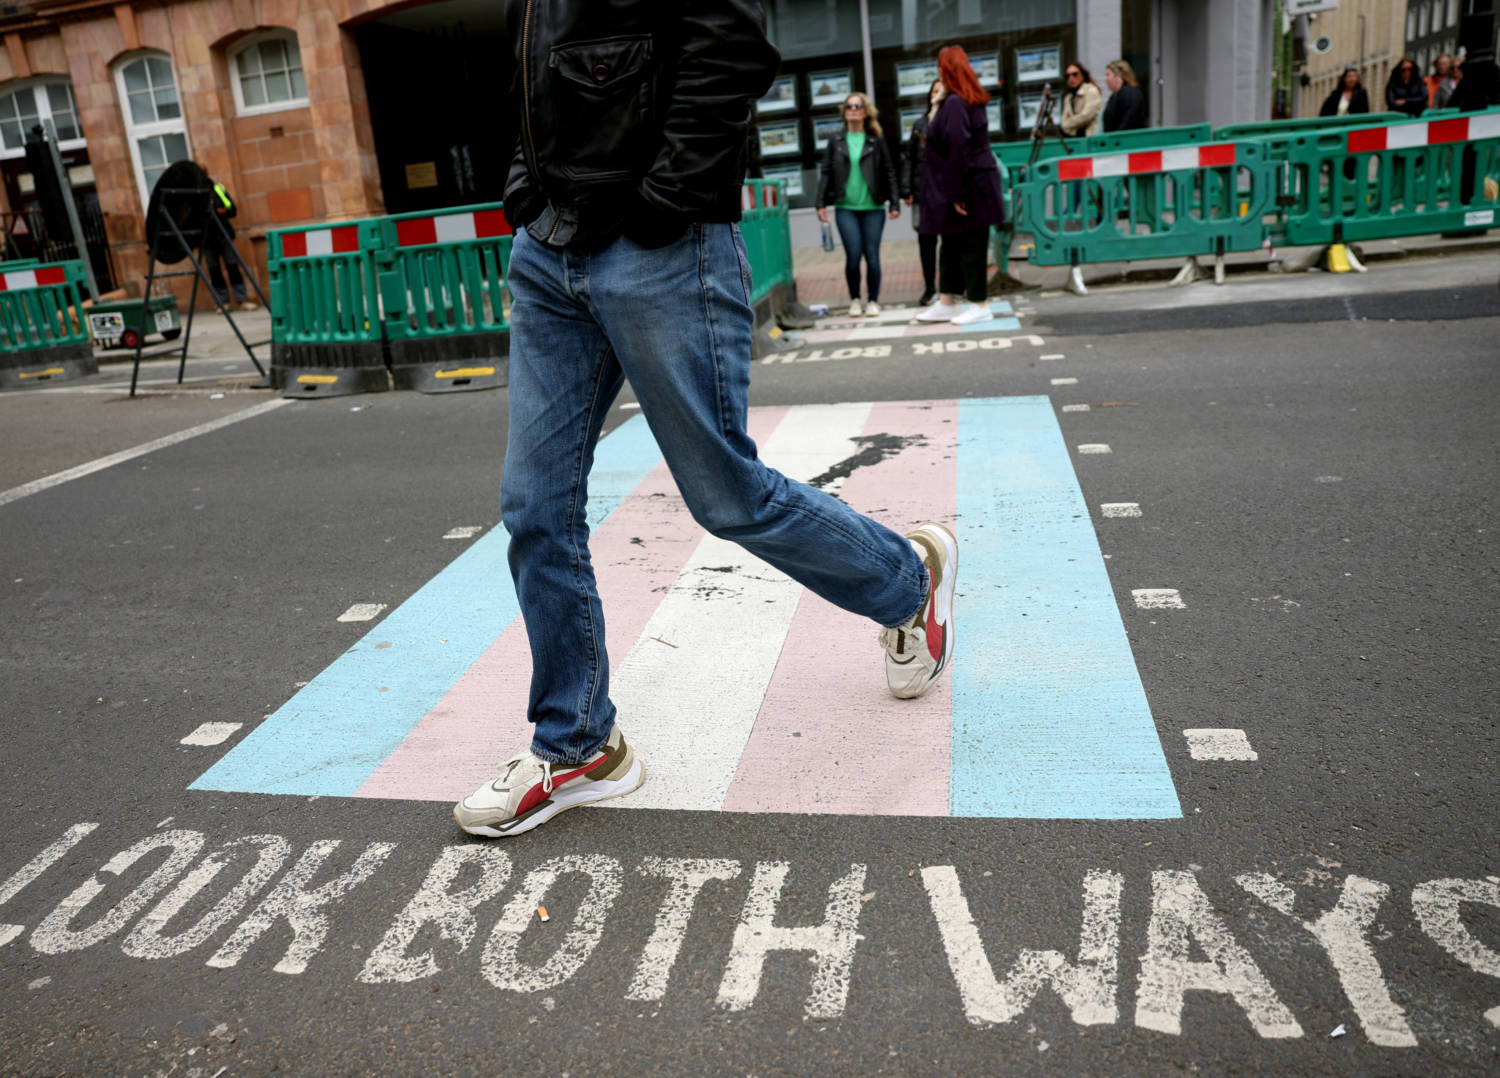 Pedestrian Crossing Decorated With The Pattern Of The Transgender Flag, In London